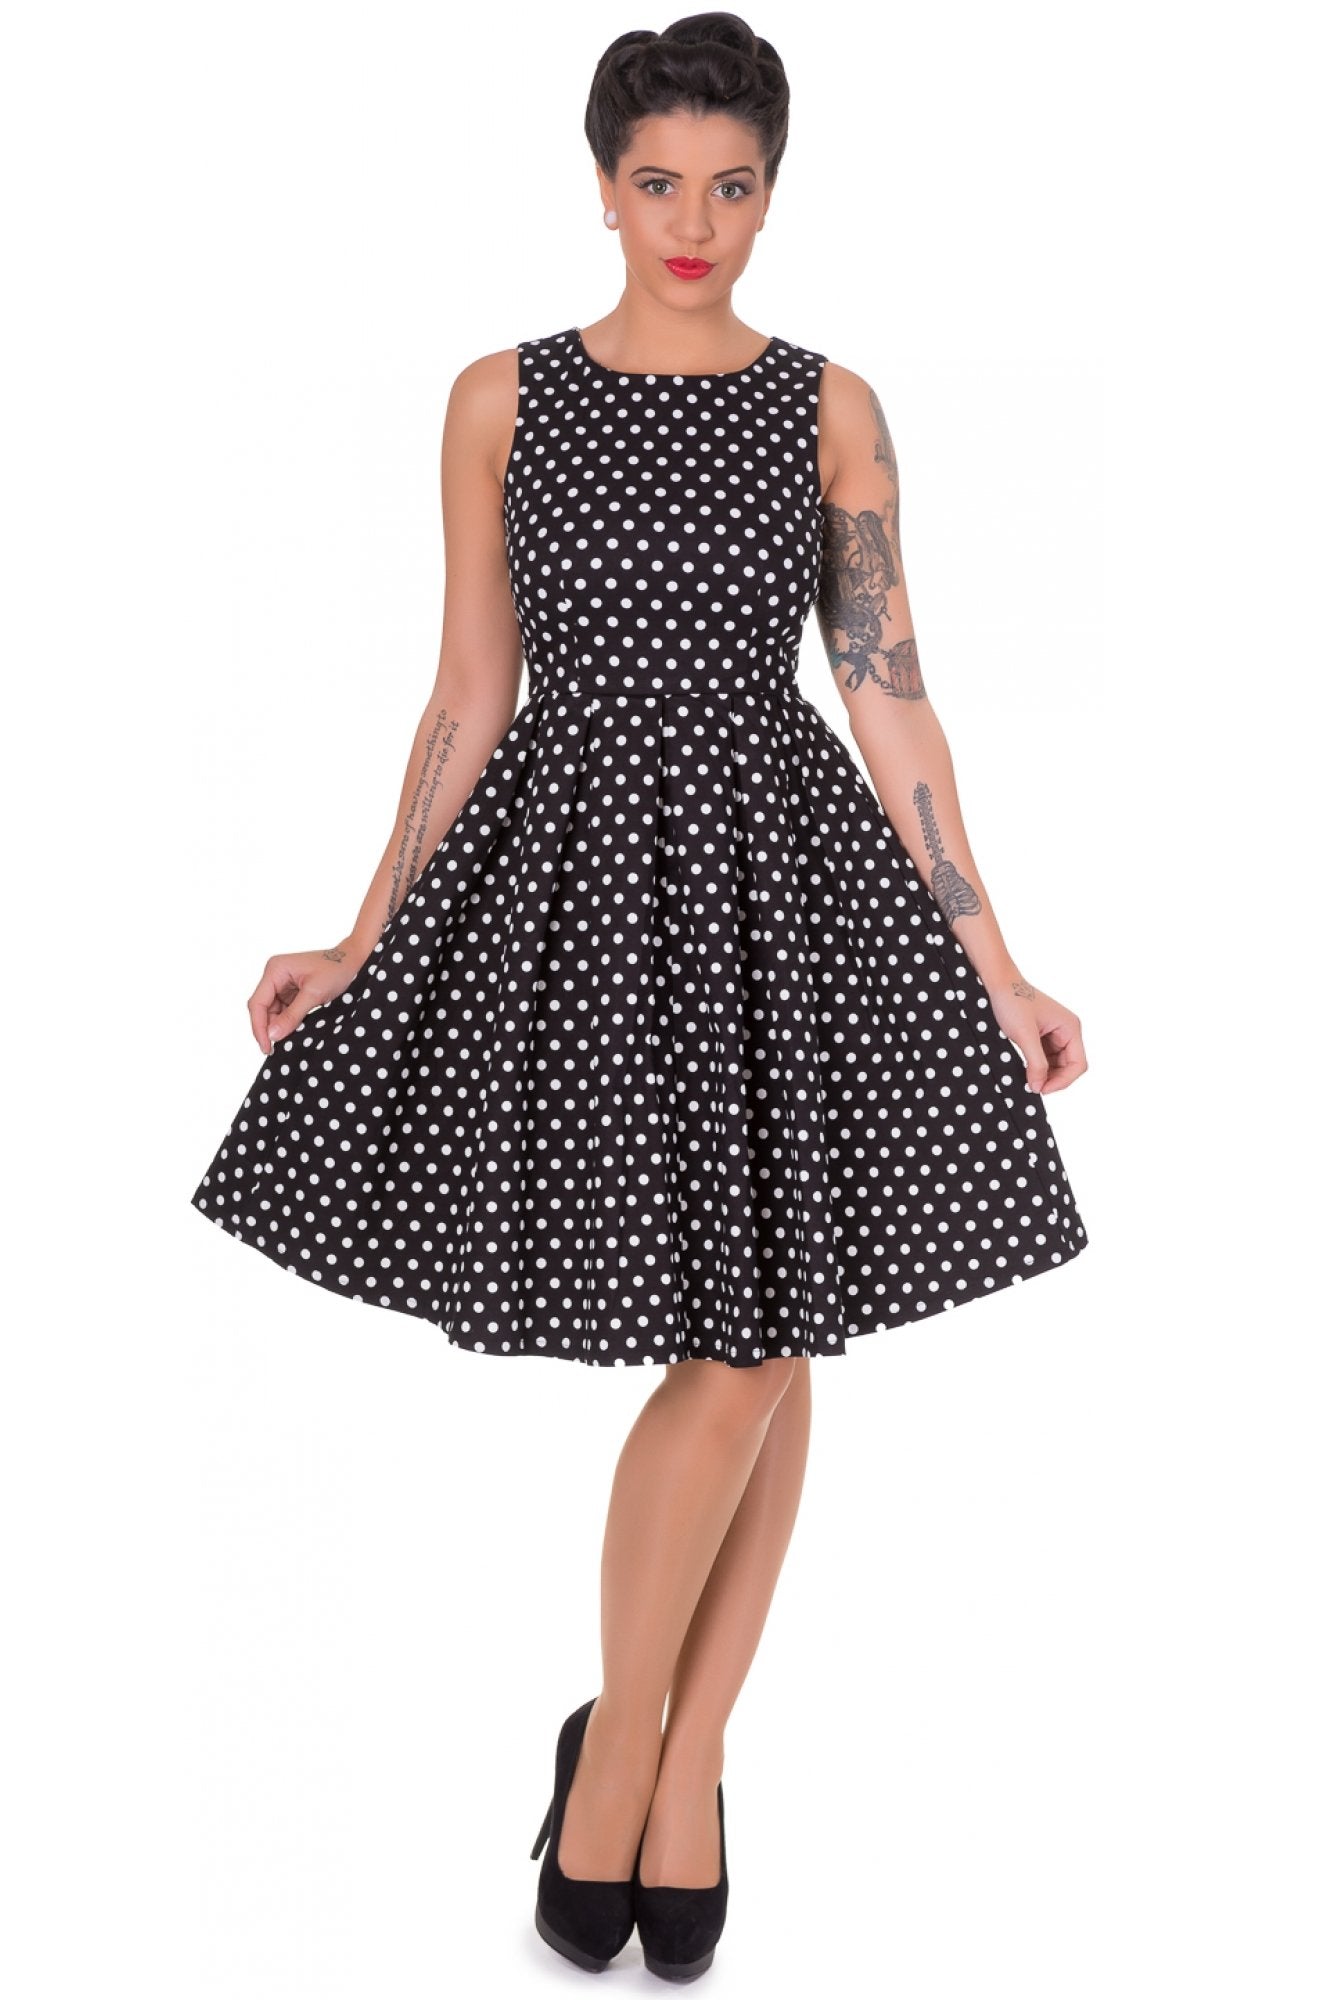 Model wears our sleeveless Lola dress in black, with white polka dots, front view